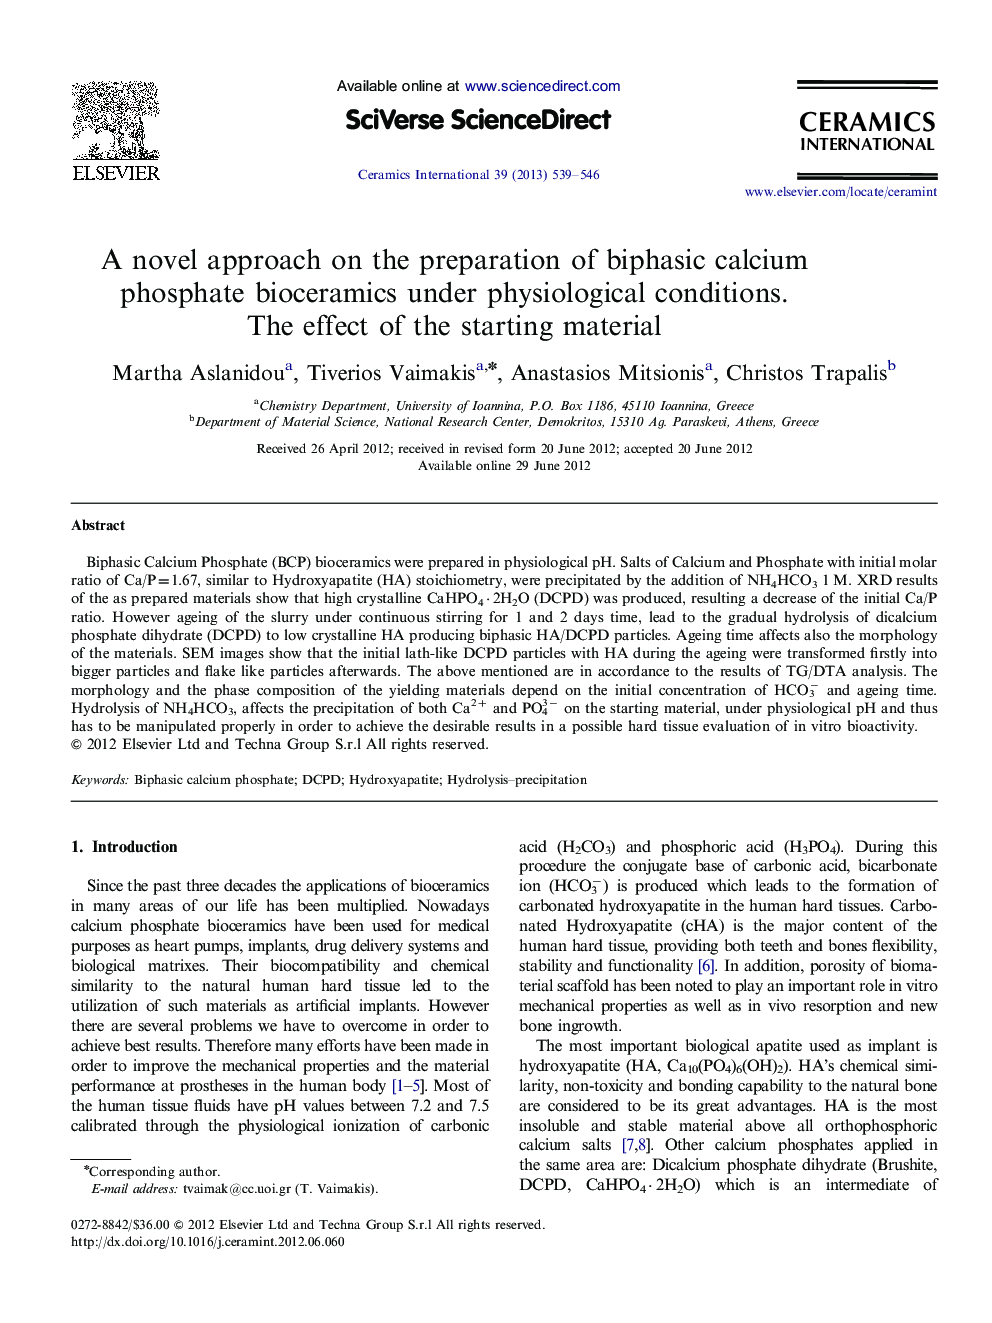 A novel approach on the preparation of biphasic calcium phosphate bioceramics under physiological conditions. The effect of the starting material